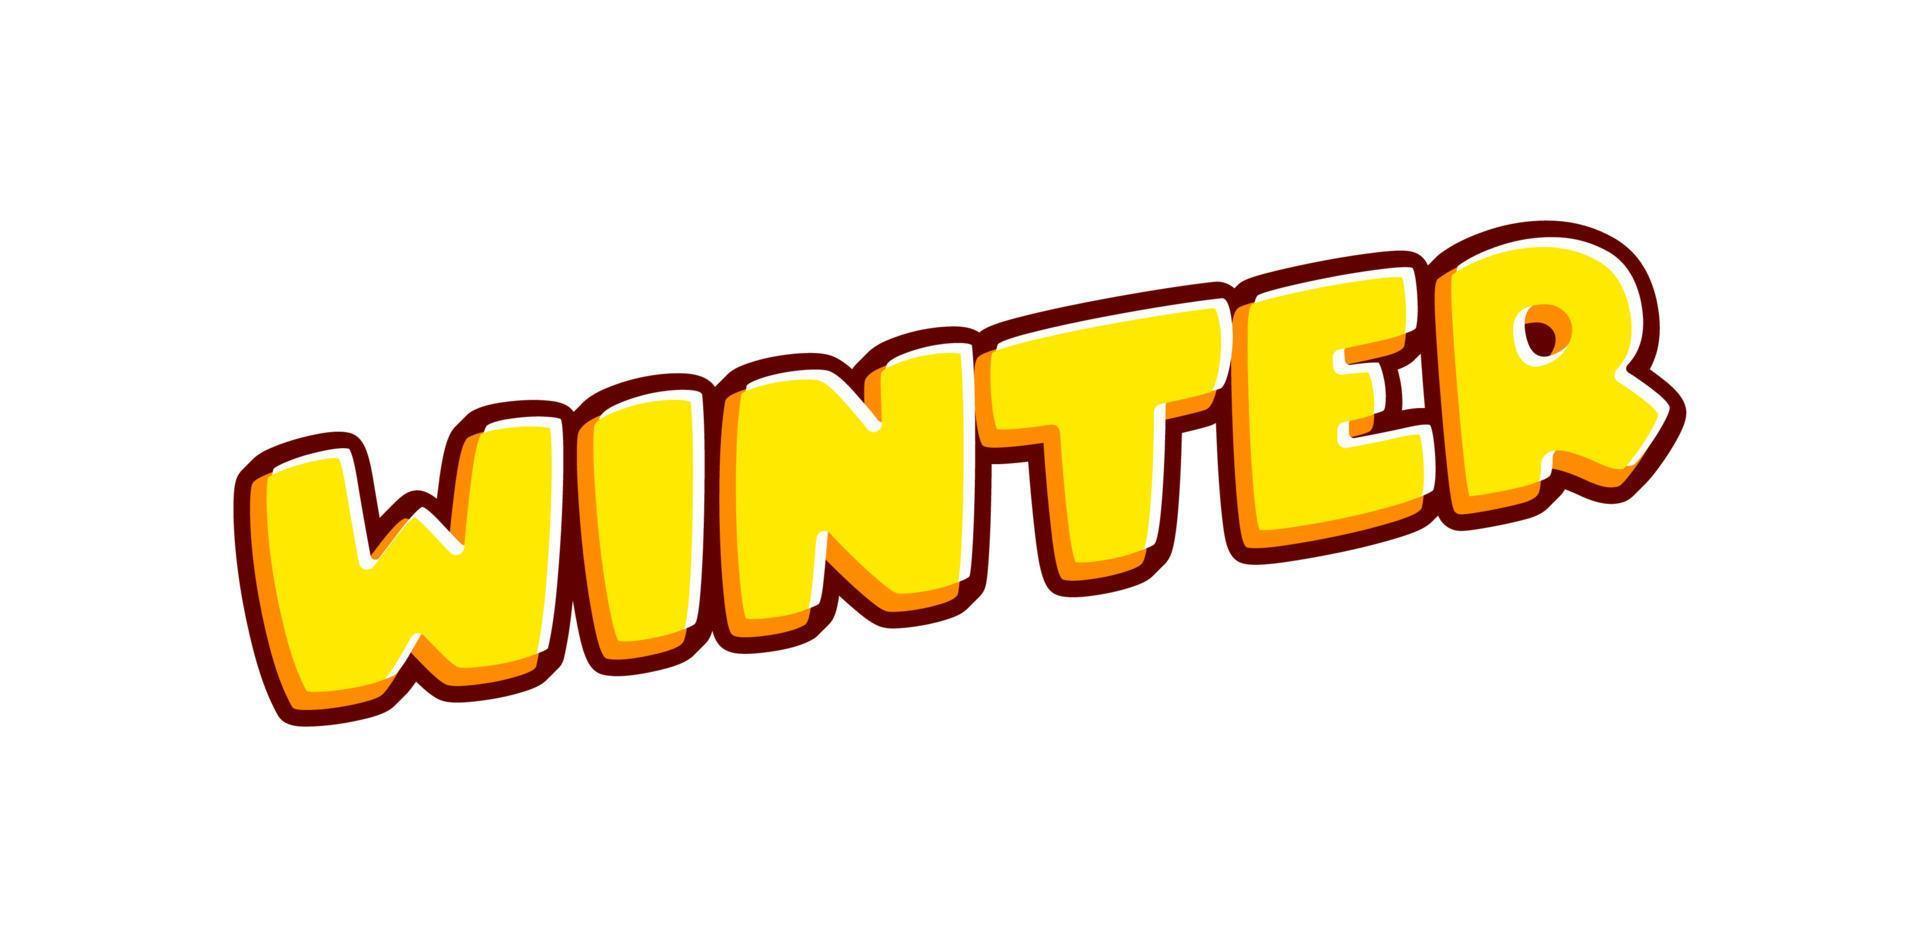 Winter lettering isolated on white colourful text effect design vector. Ice cold frozen weather. Text or inscriptions in English. The modern and creative design has red, orange, yellow colors. vector